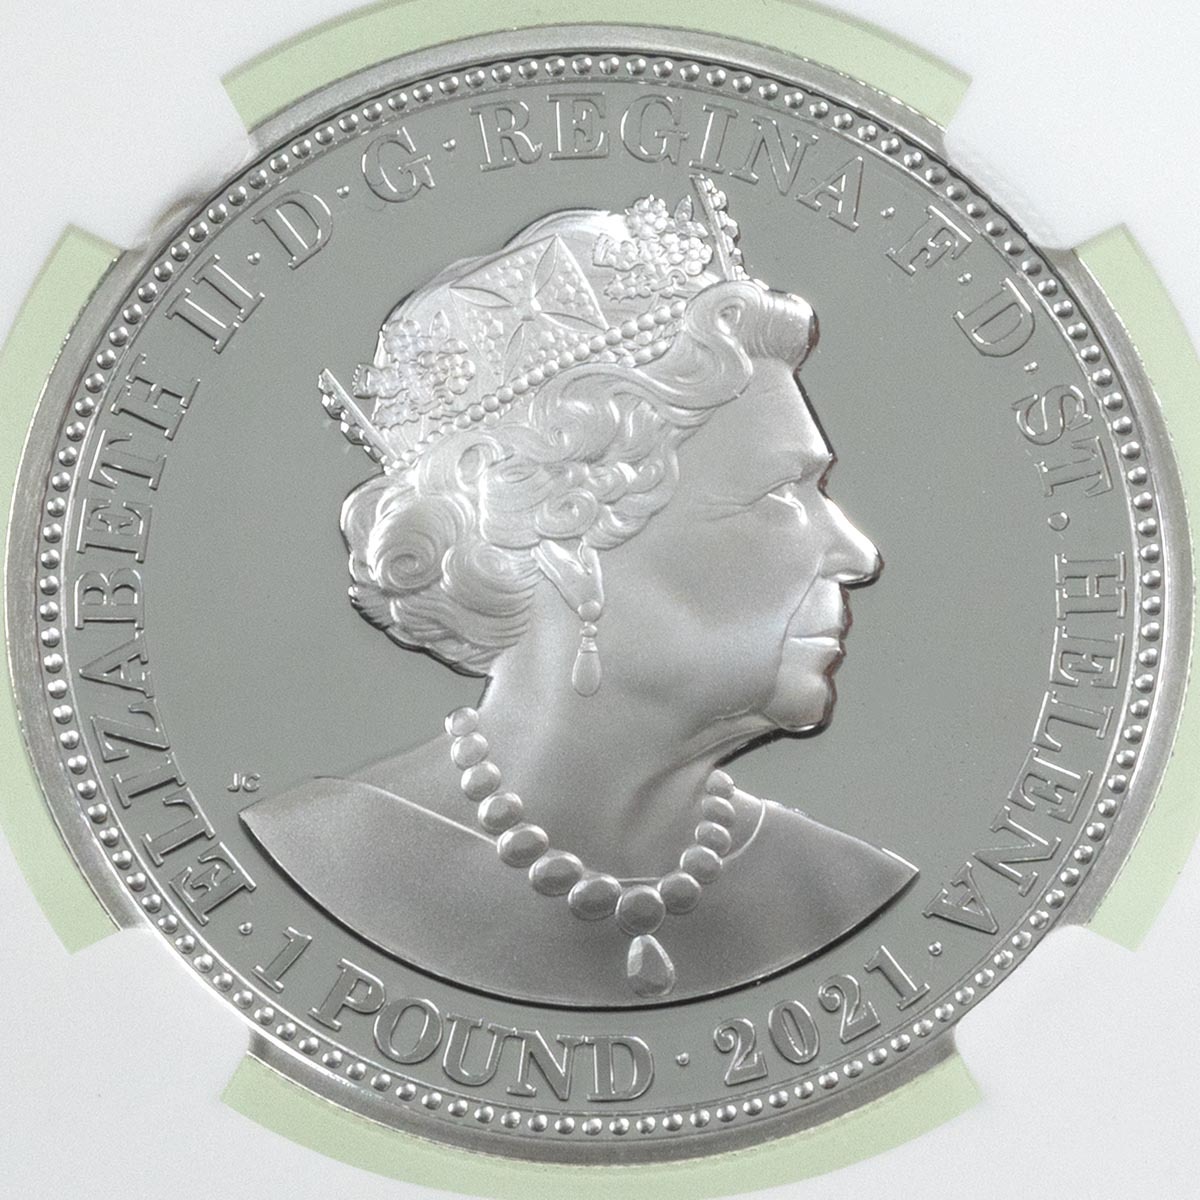 2021 Saint Helena Three Graces One Ounce Silver Proof Coin NGC Graded PF 69 Ultra Cameo First Releases Obverses